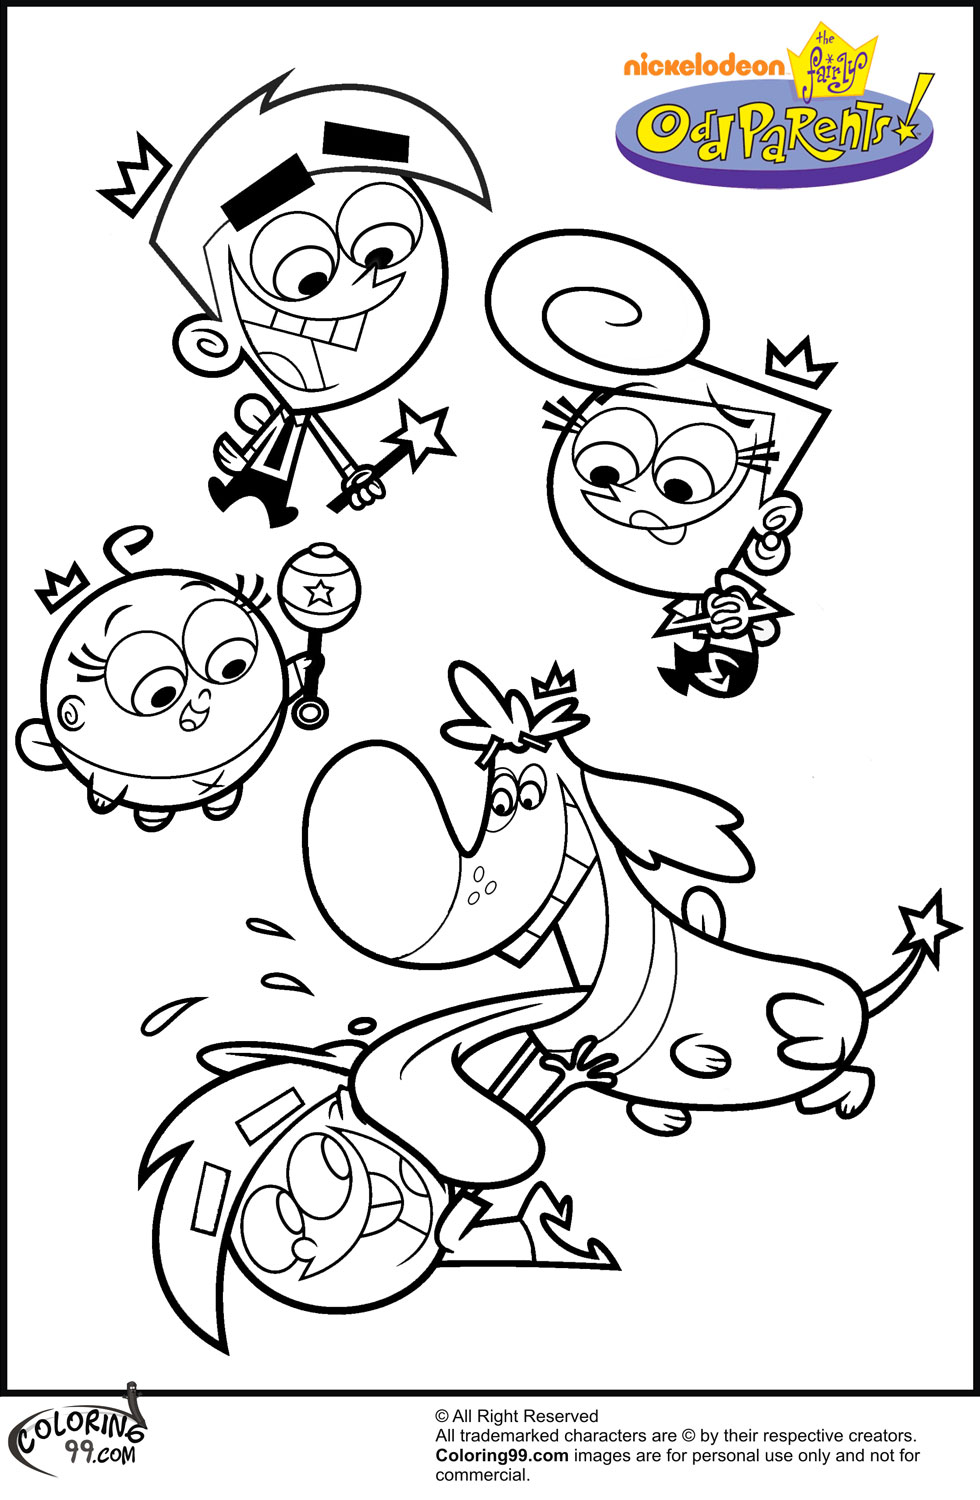 fairy oddparents coloring pages - photo #12